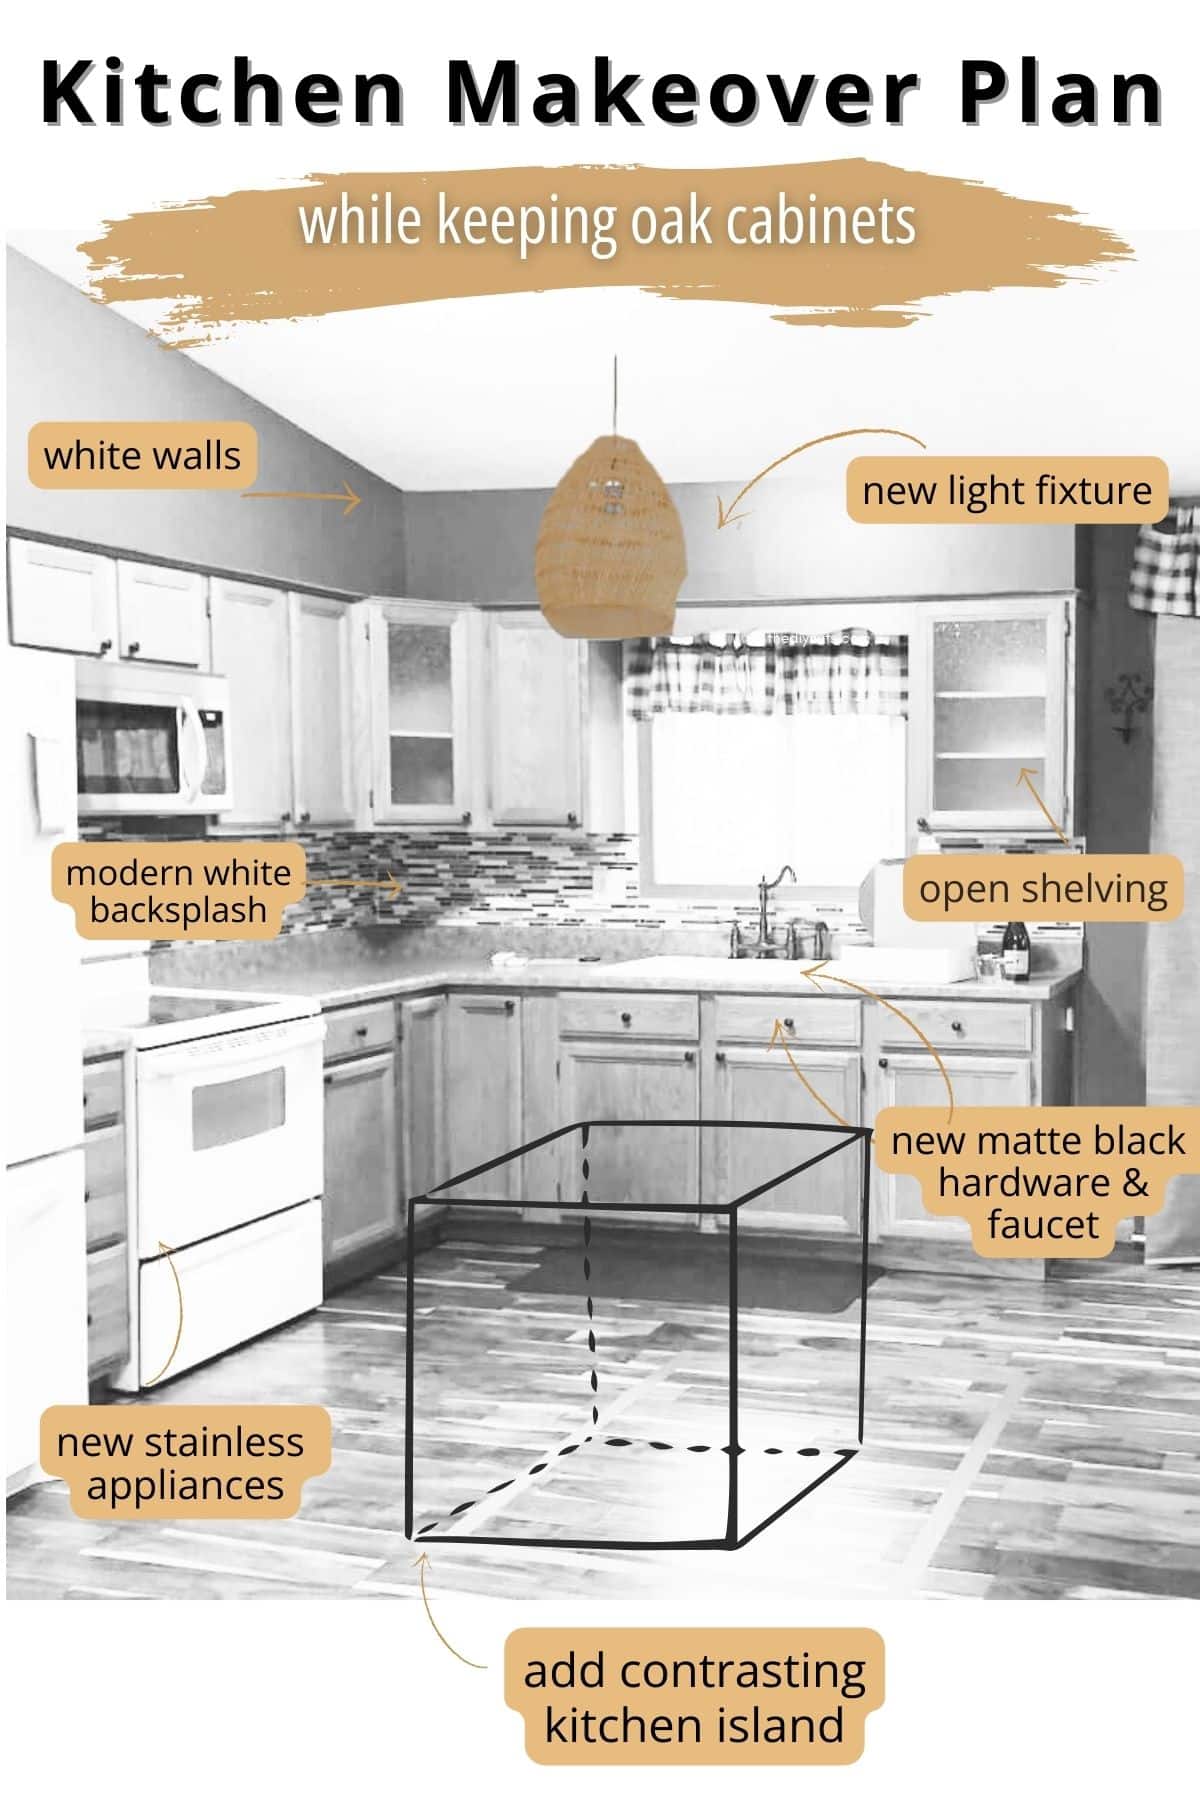 kitchen makeover plan while keeping oak kitchen cabinets.